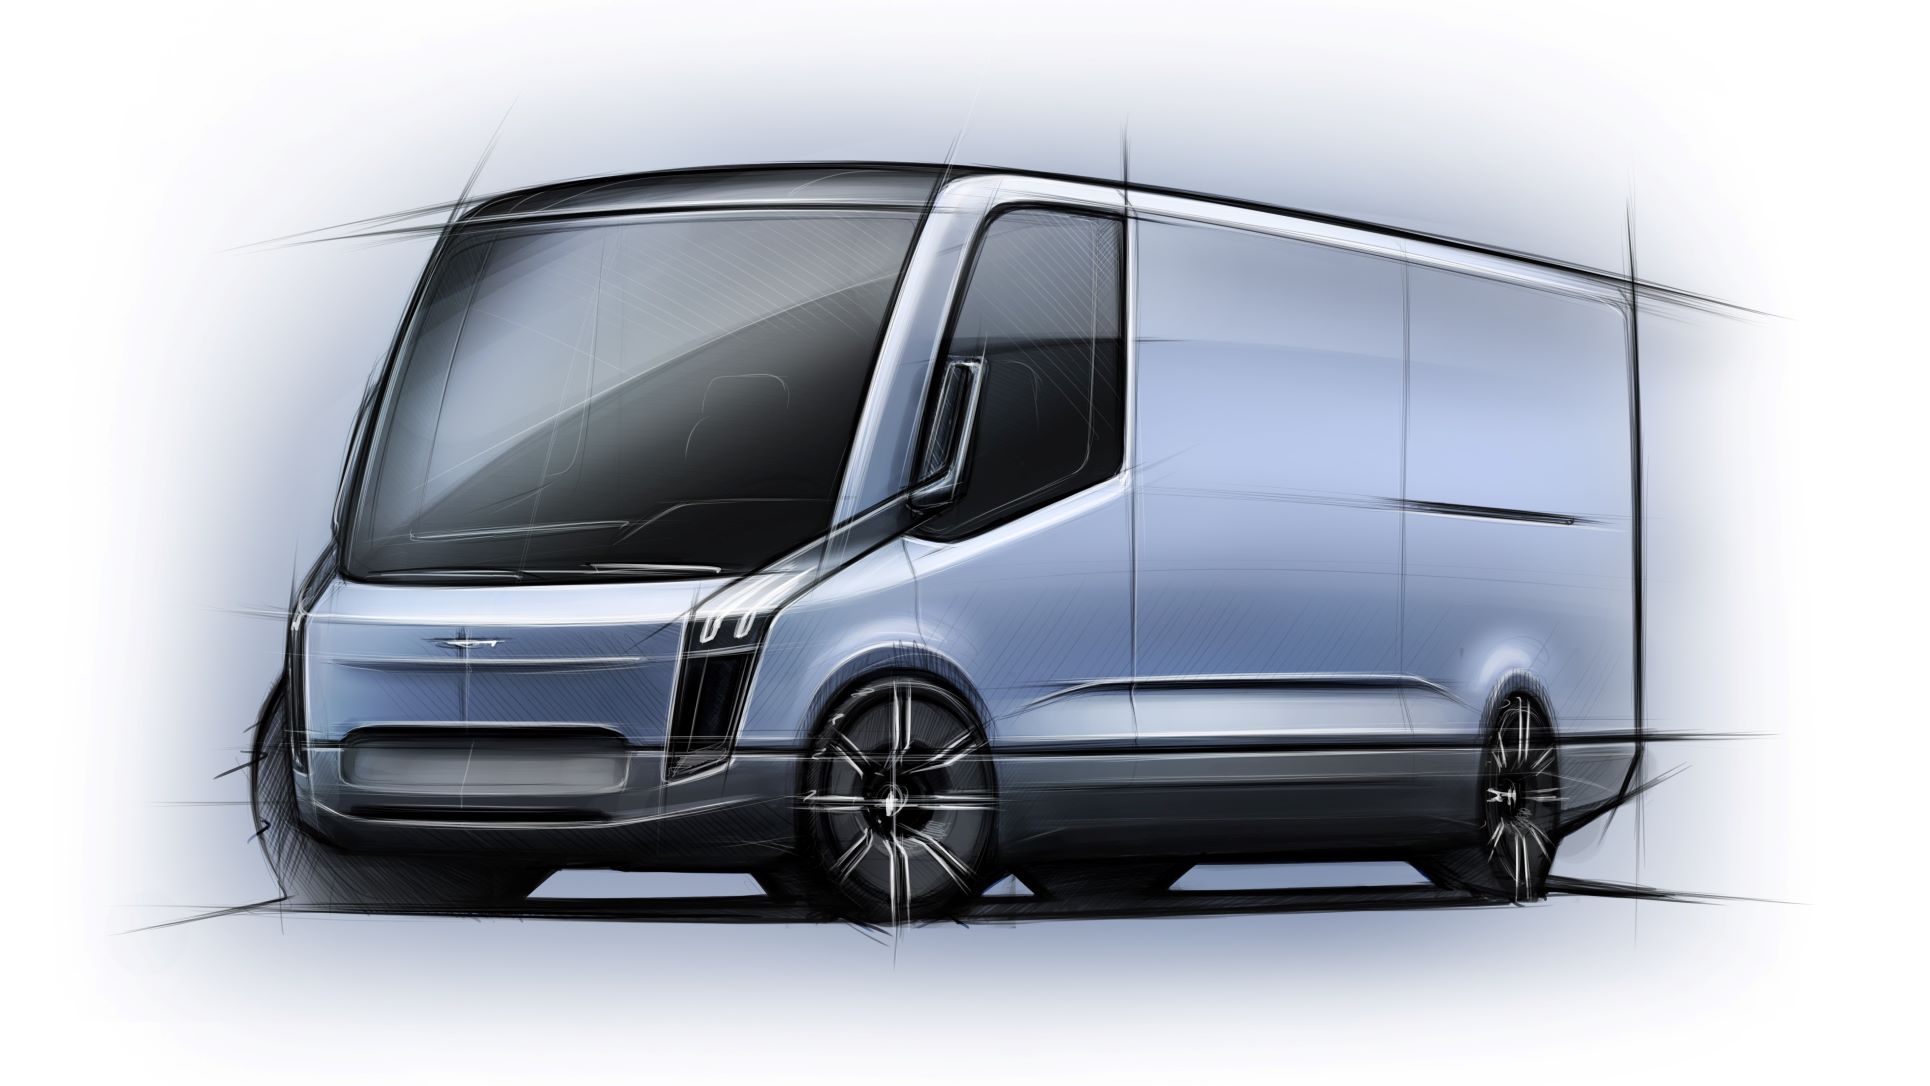 The van of the future: Iveco VISION concept revealed